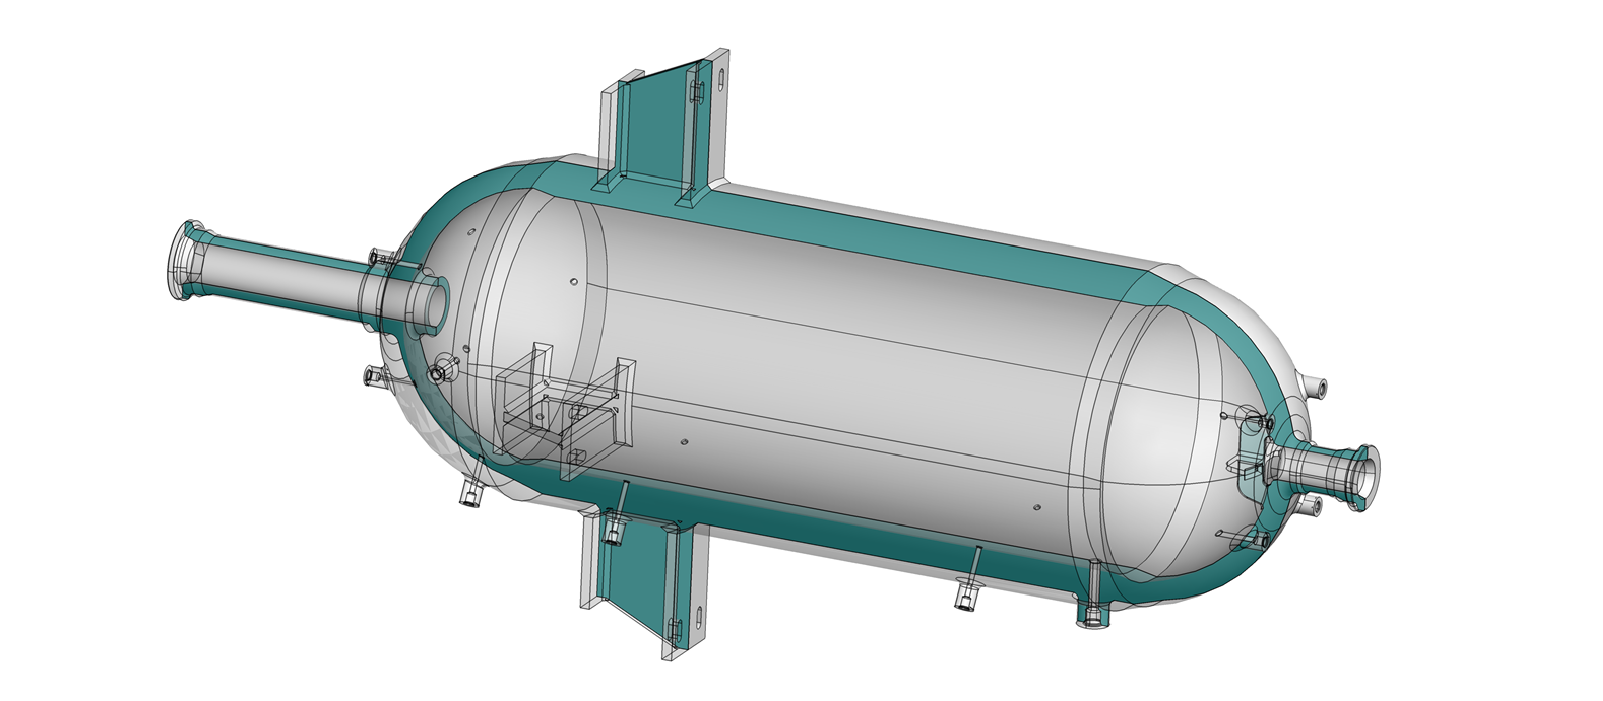 Figure 1: Thick-wall, high-pressure tank